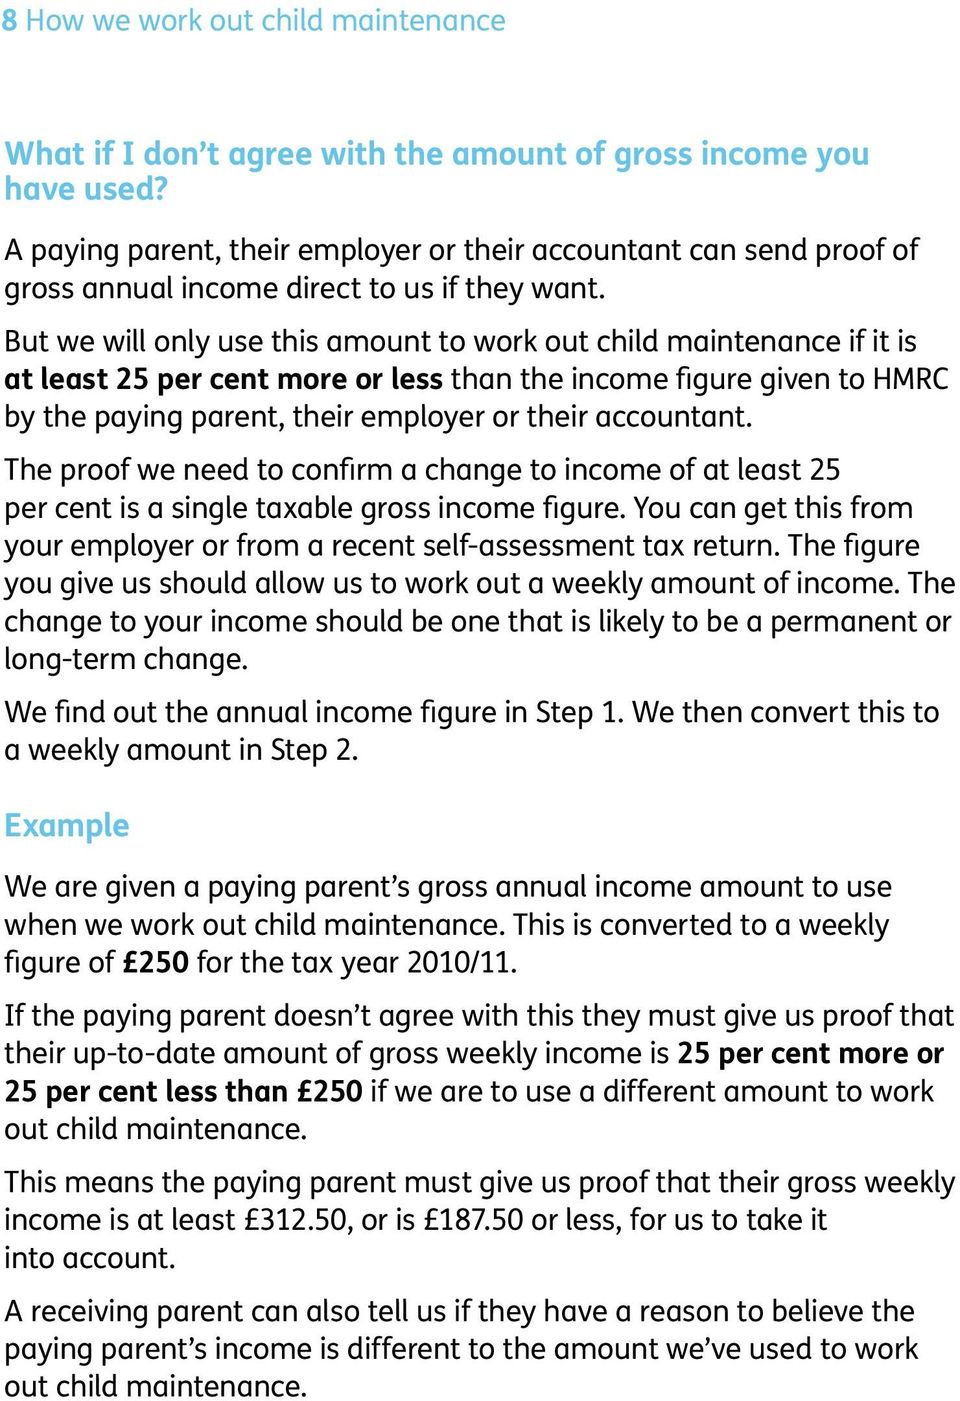 But we will only use this amount to work out child maintenance if it is at least 25 per cent more or less than the income figure given to HMRC by the paying parent, their employer or their accountant.